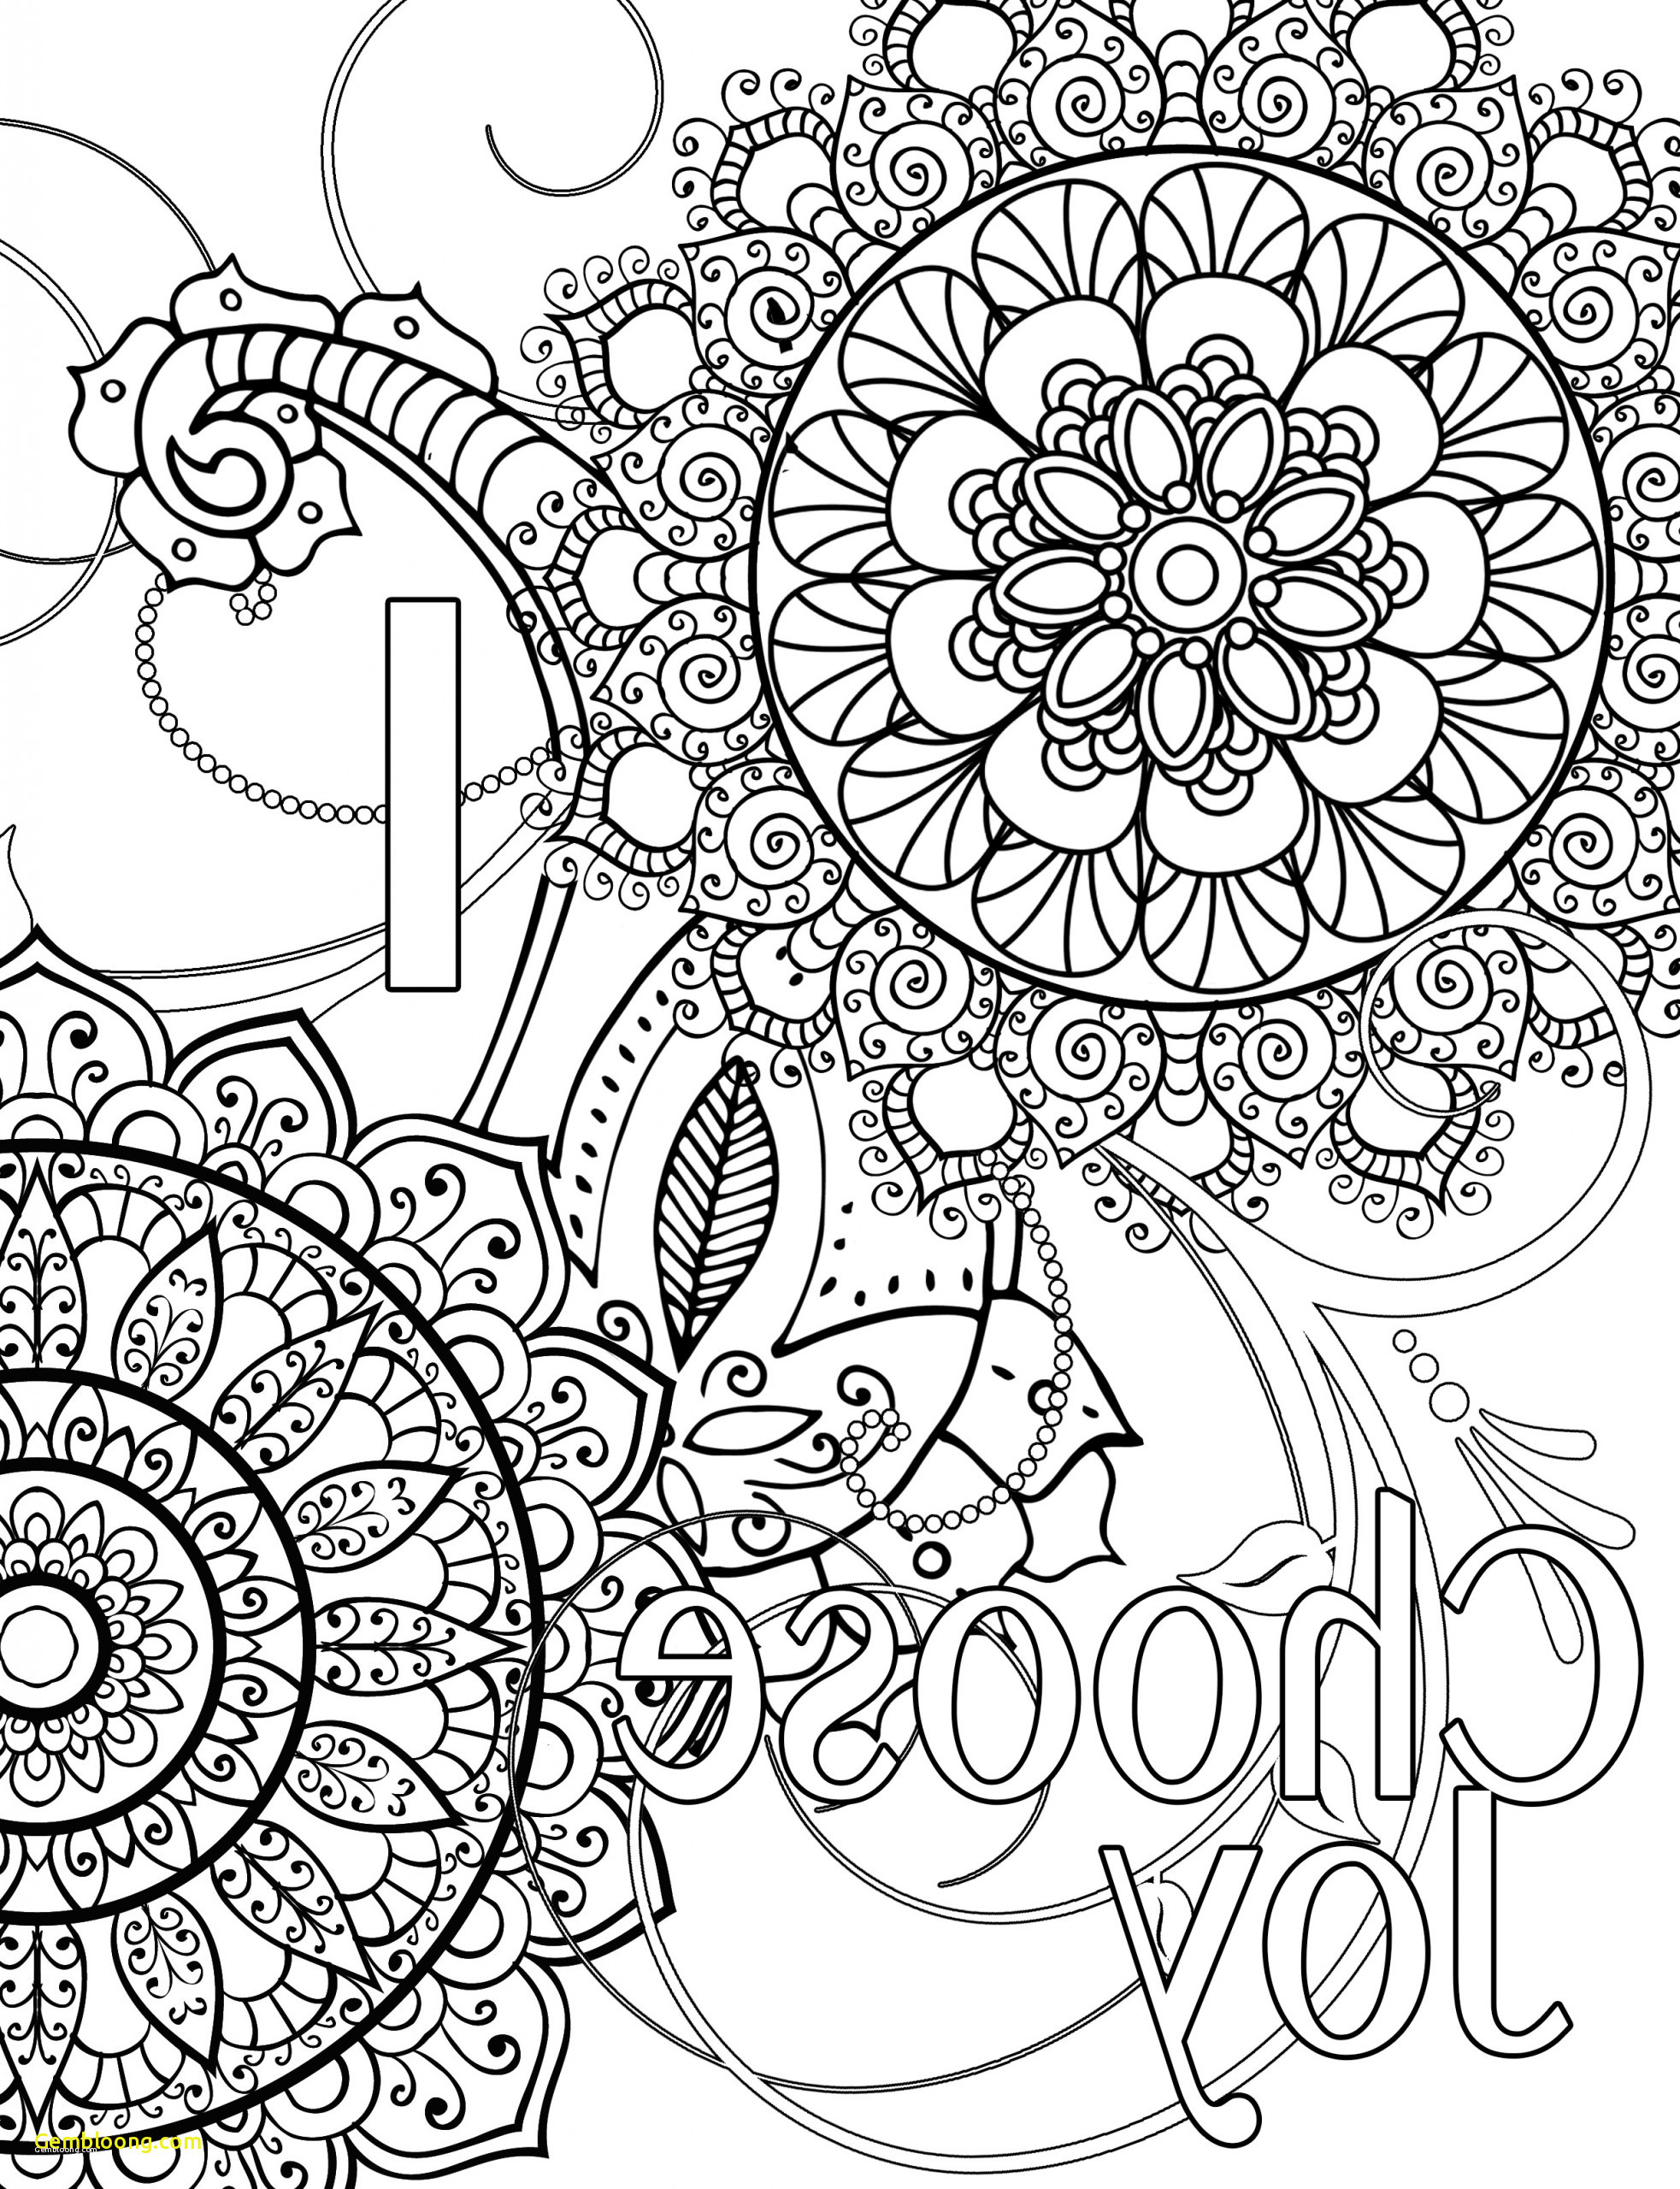 coloring pages : Curse Word Coloring Book Luxury Coloring Pages Swear Word  Adult Coloring Book Swear Word Curse Word Coloring Book ~ peak